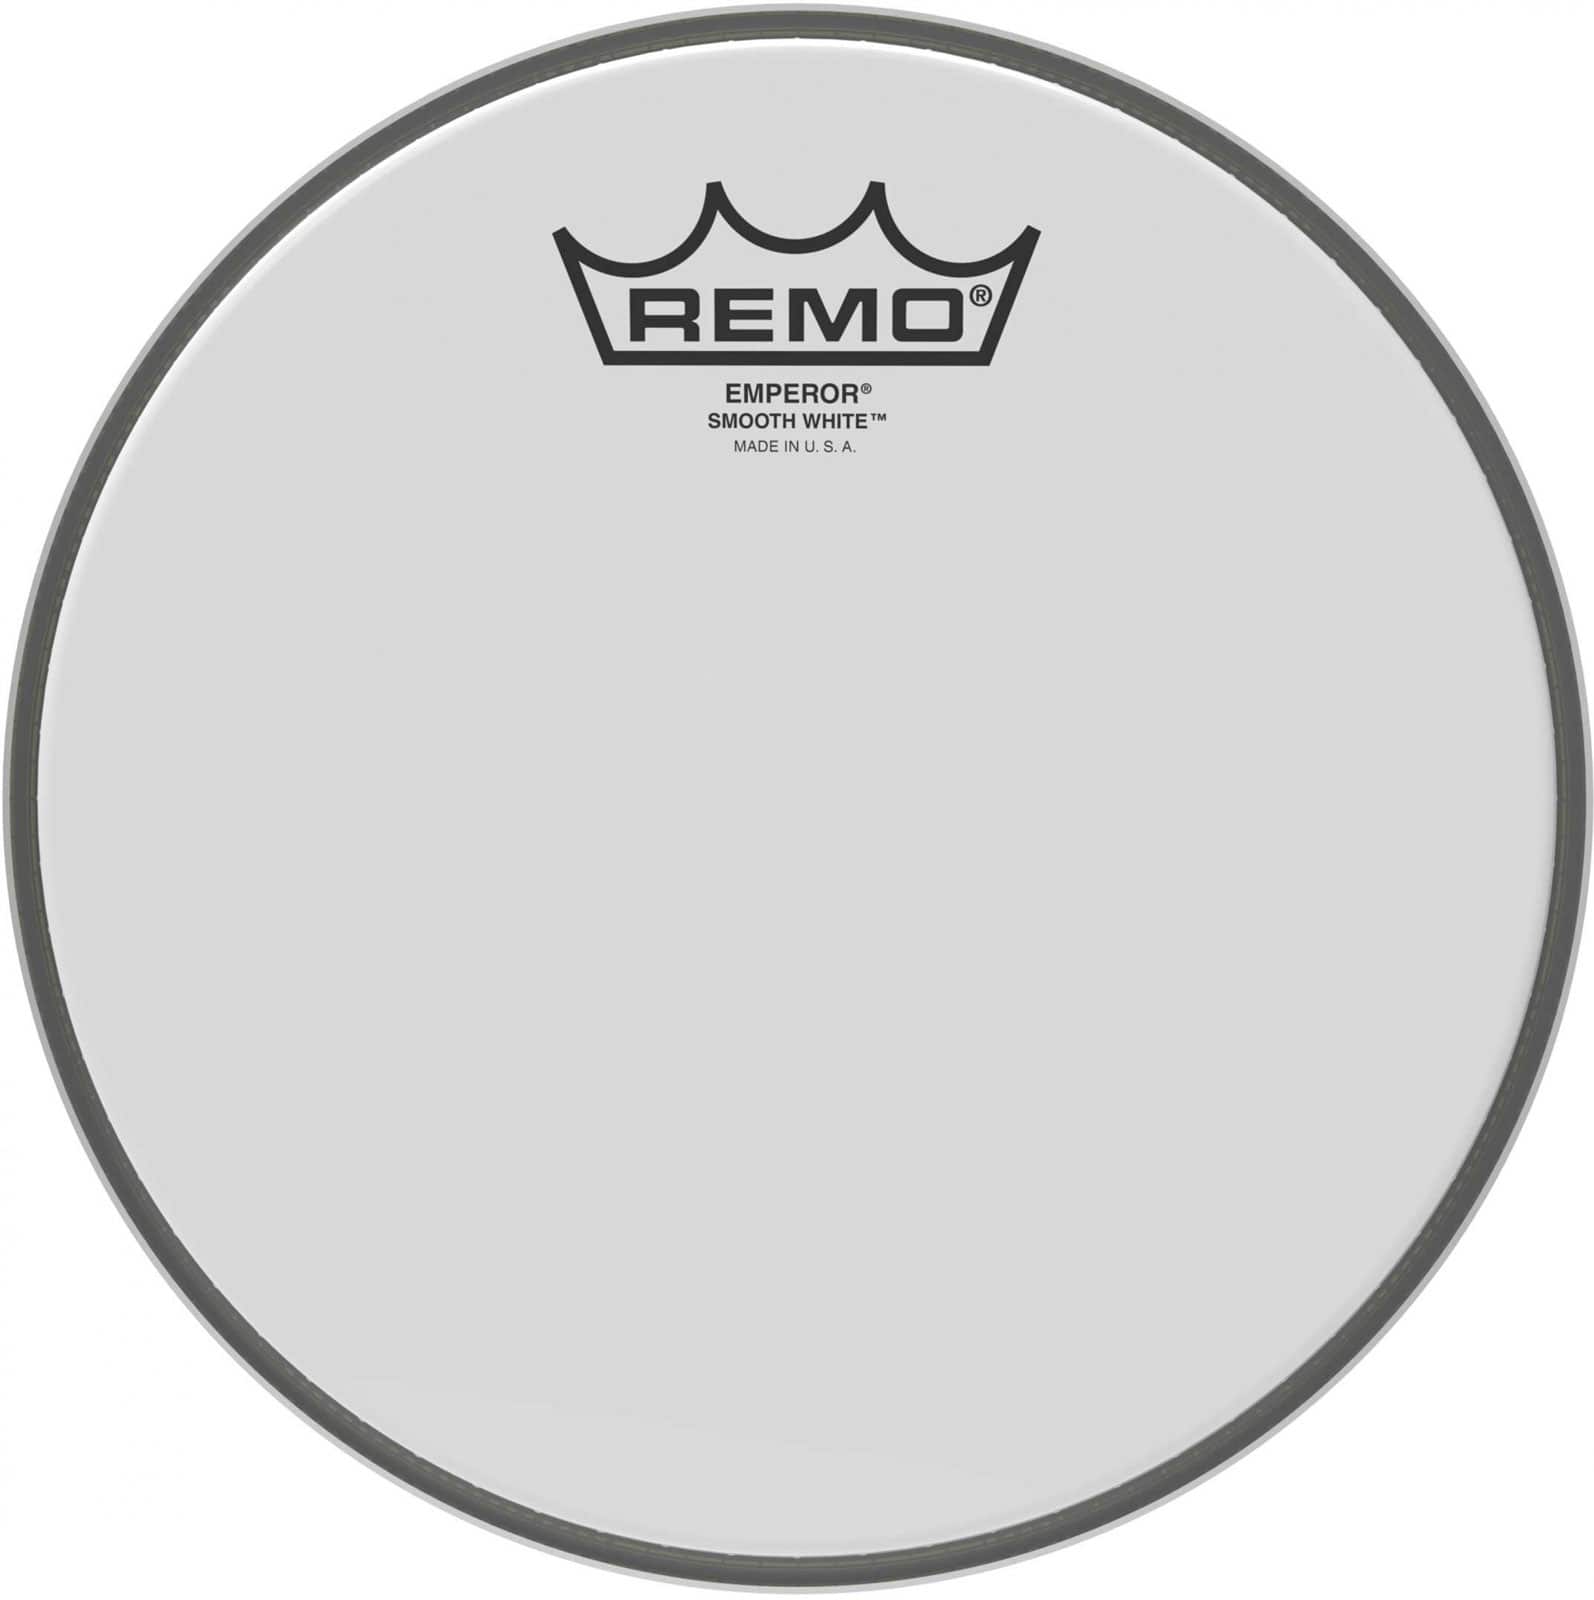 REMO EMPEROR 8 - SMOOTH WHITE - BE-0208-00